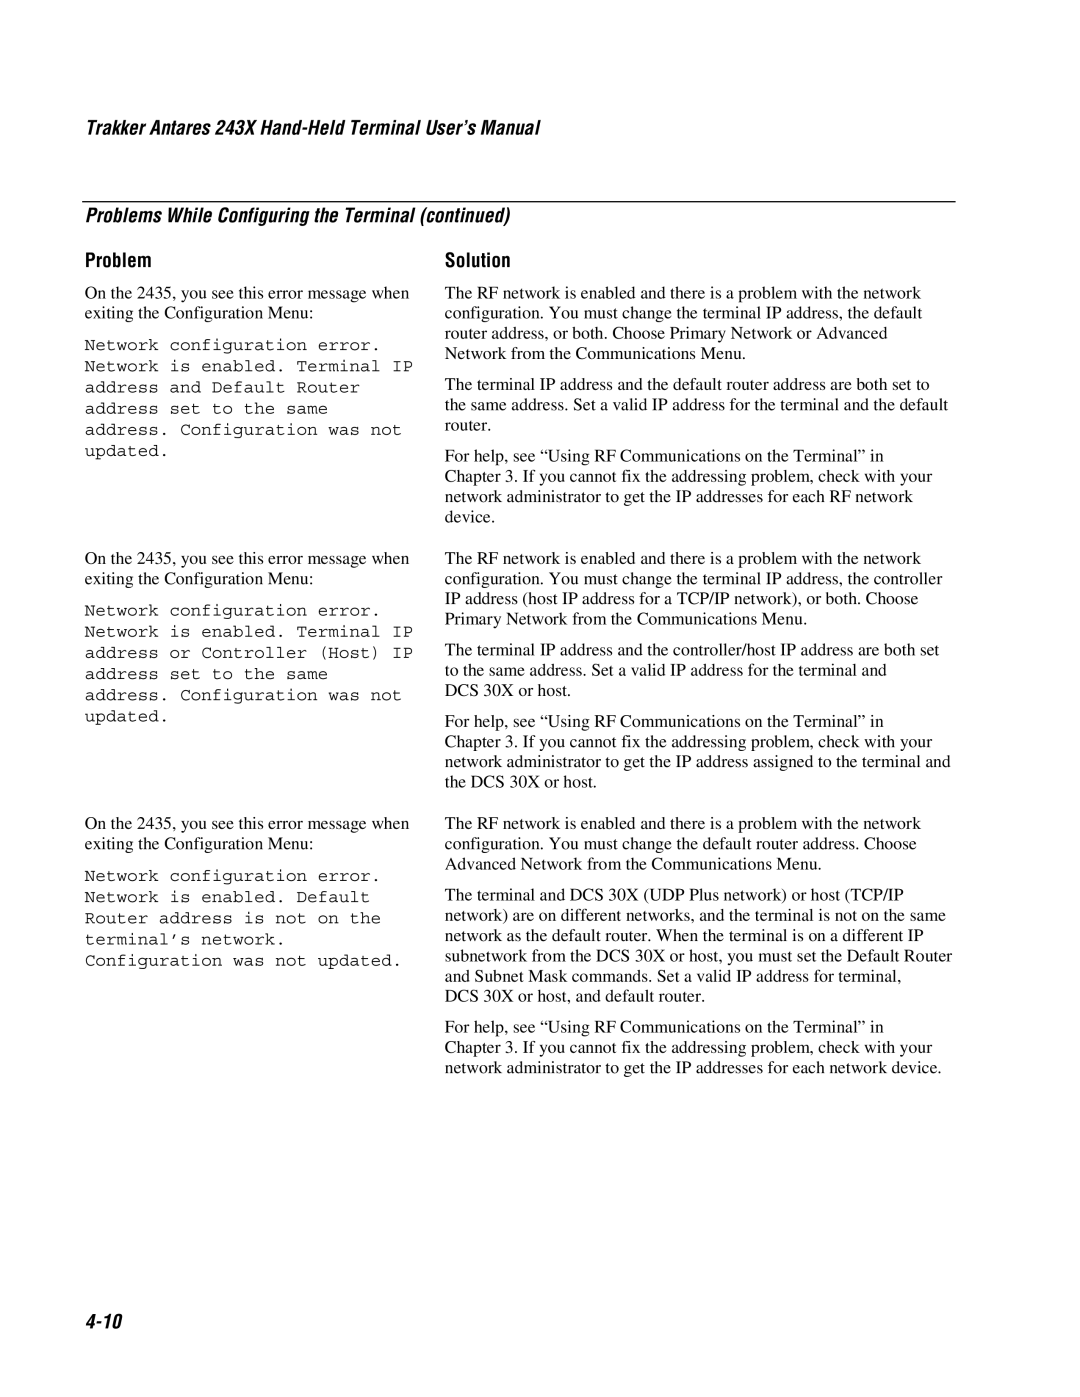 IBM 4-10, Trakker Antares 243X Hand-Held Terminal User’s Manual, Problems While Configuring the Terminal continued 